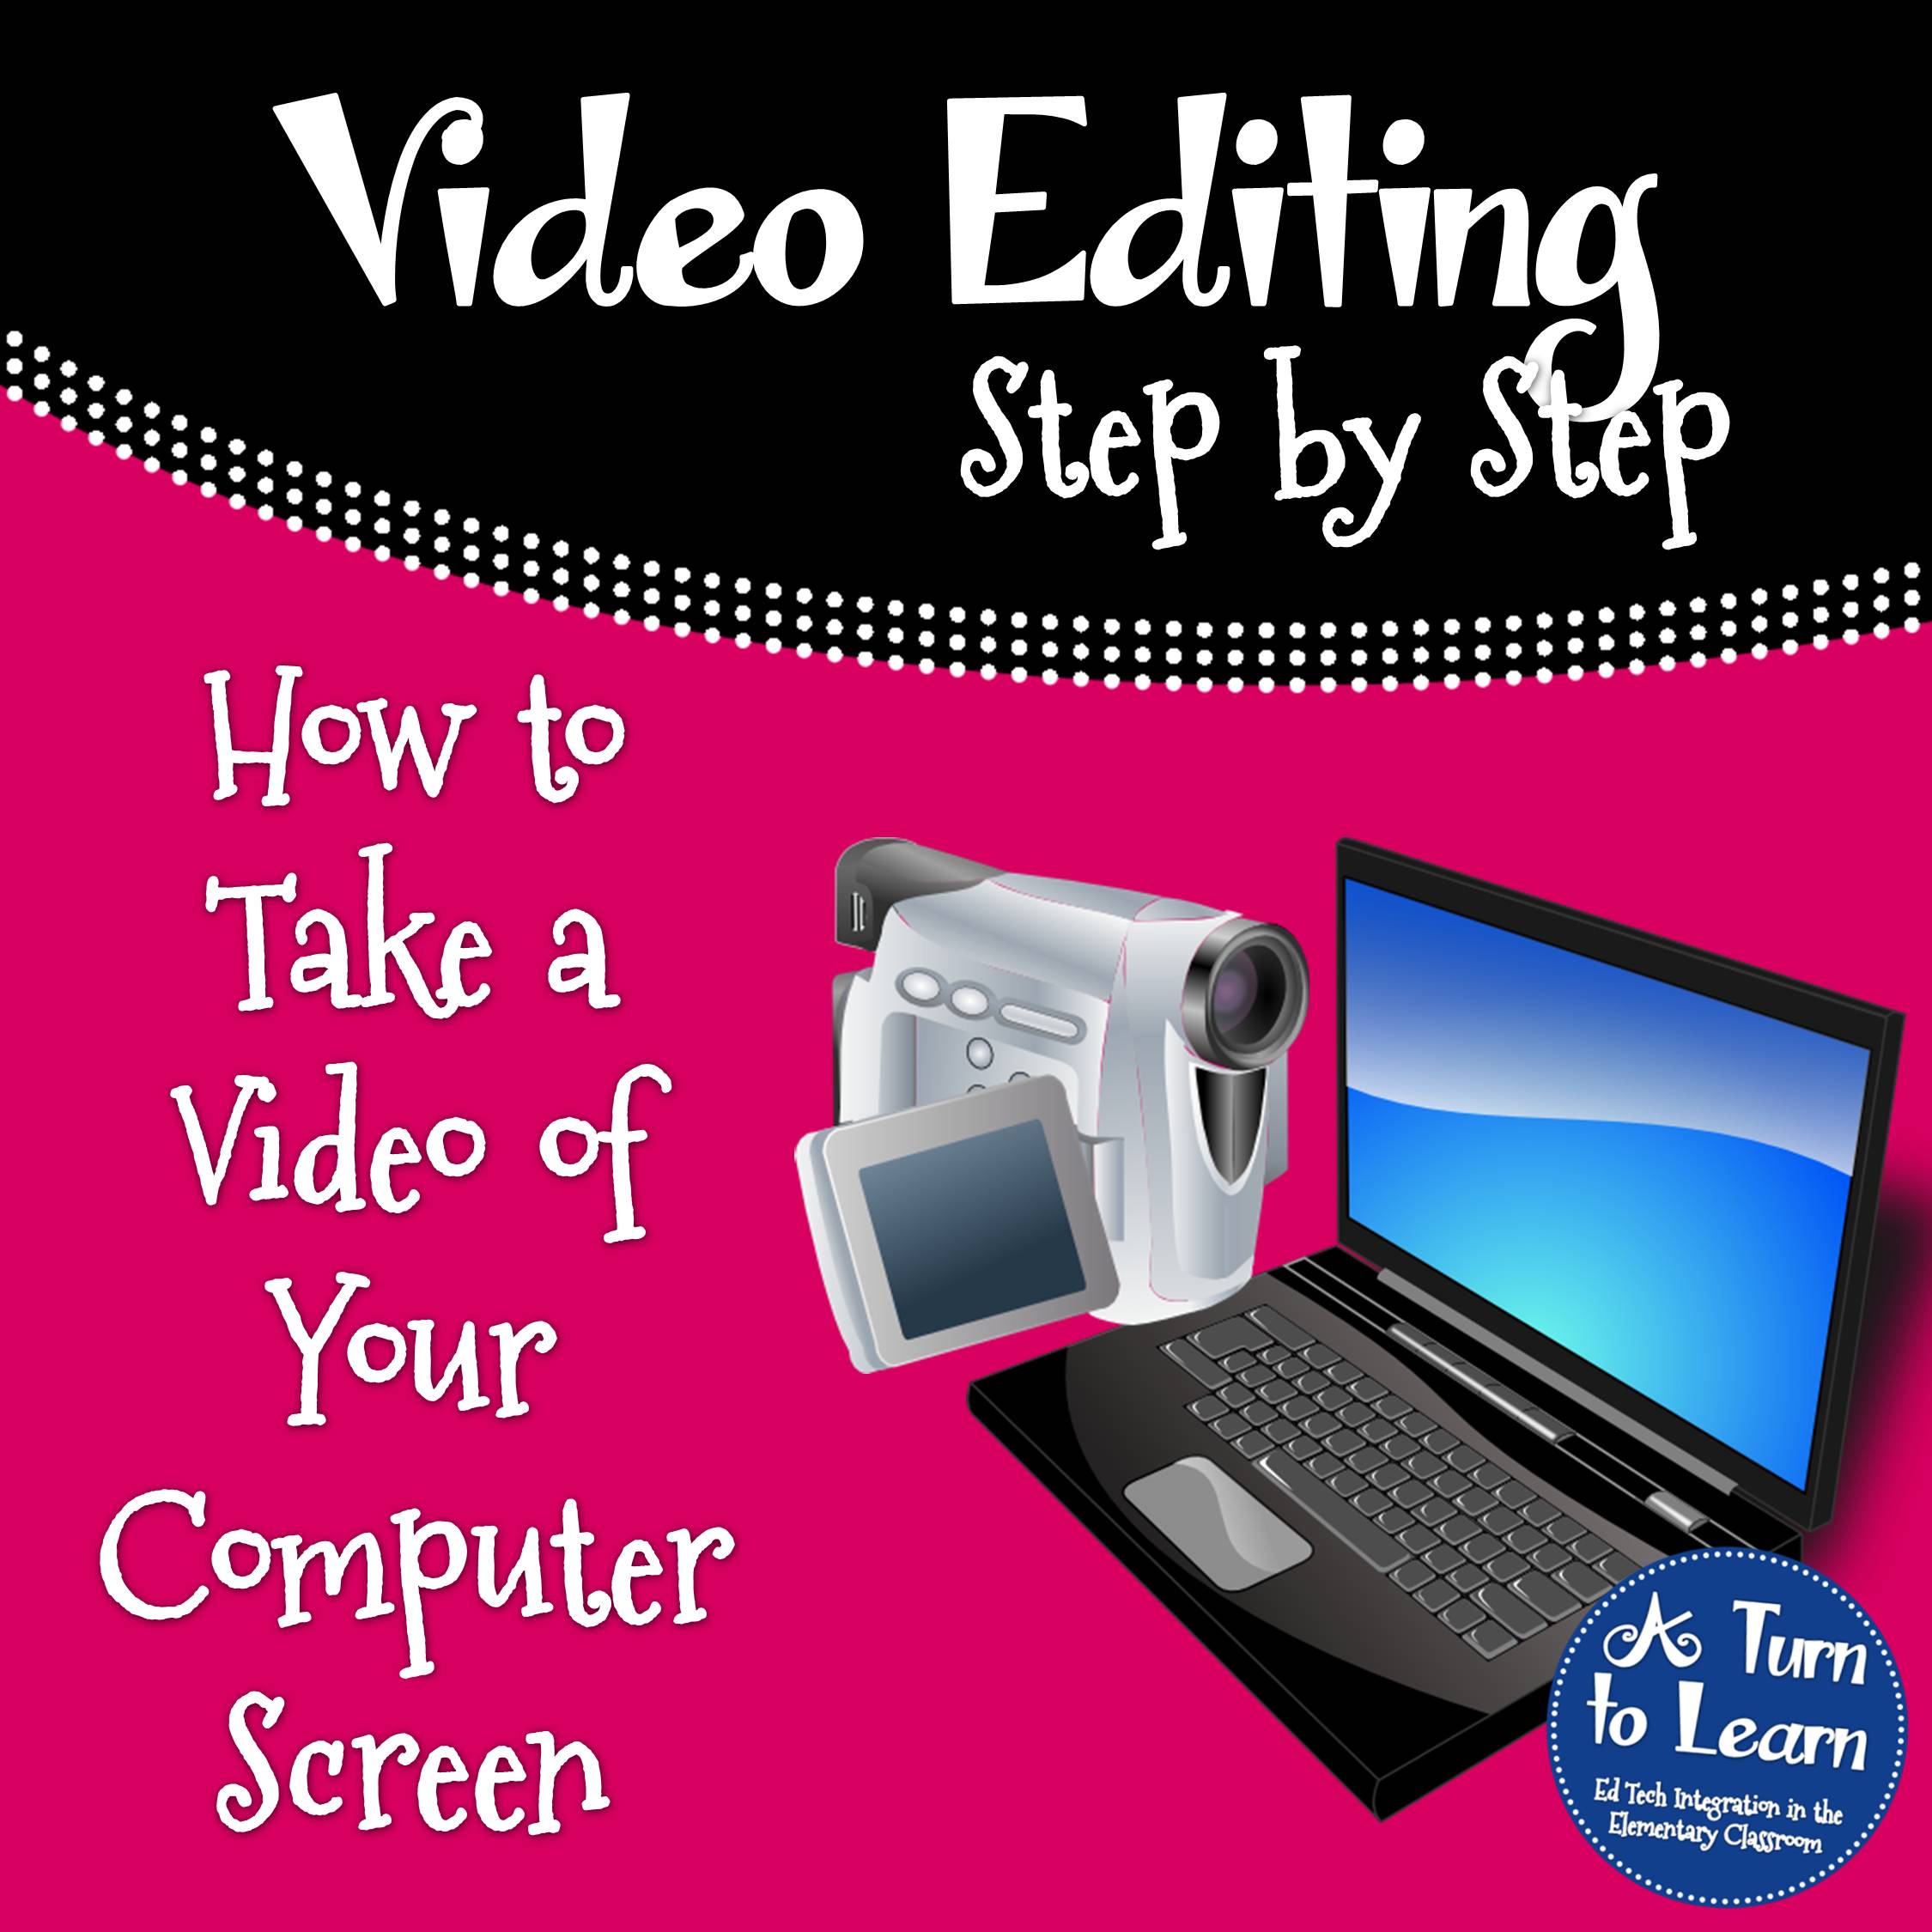 How to Take a Video of Your Computer Screen